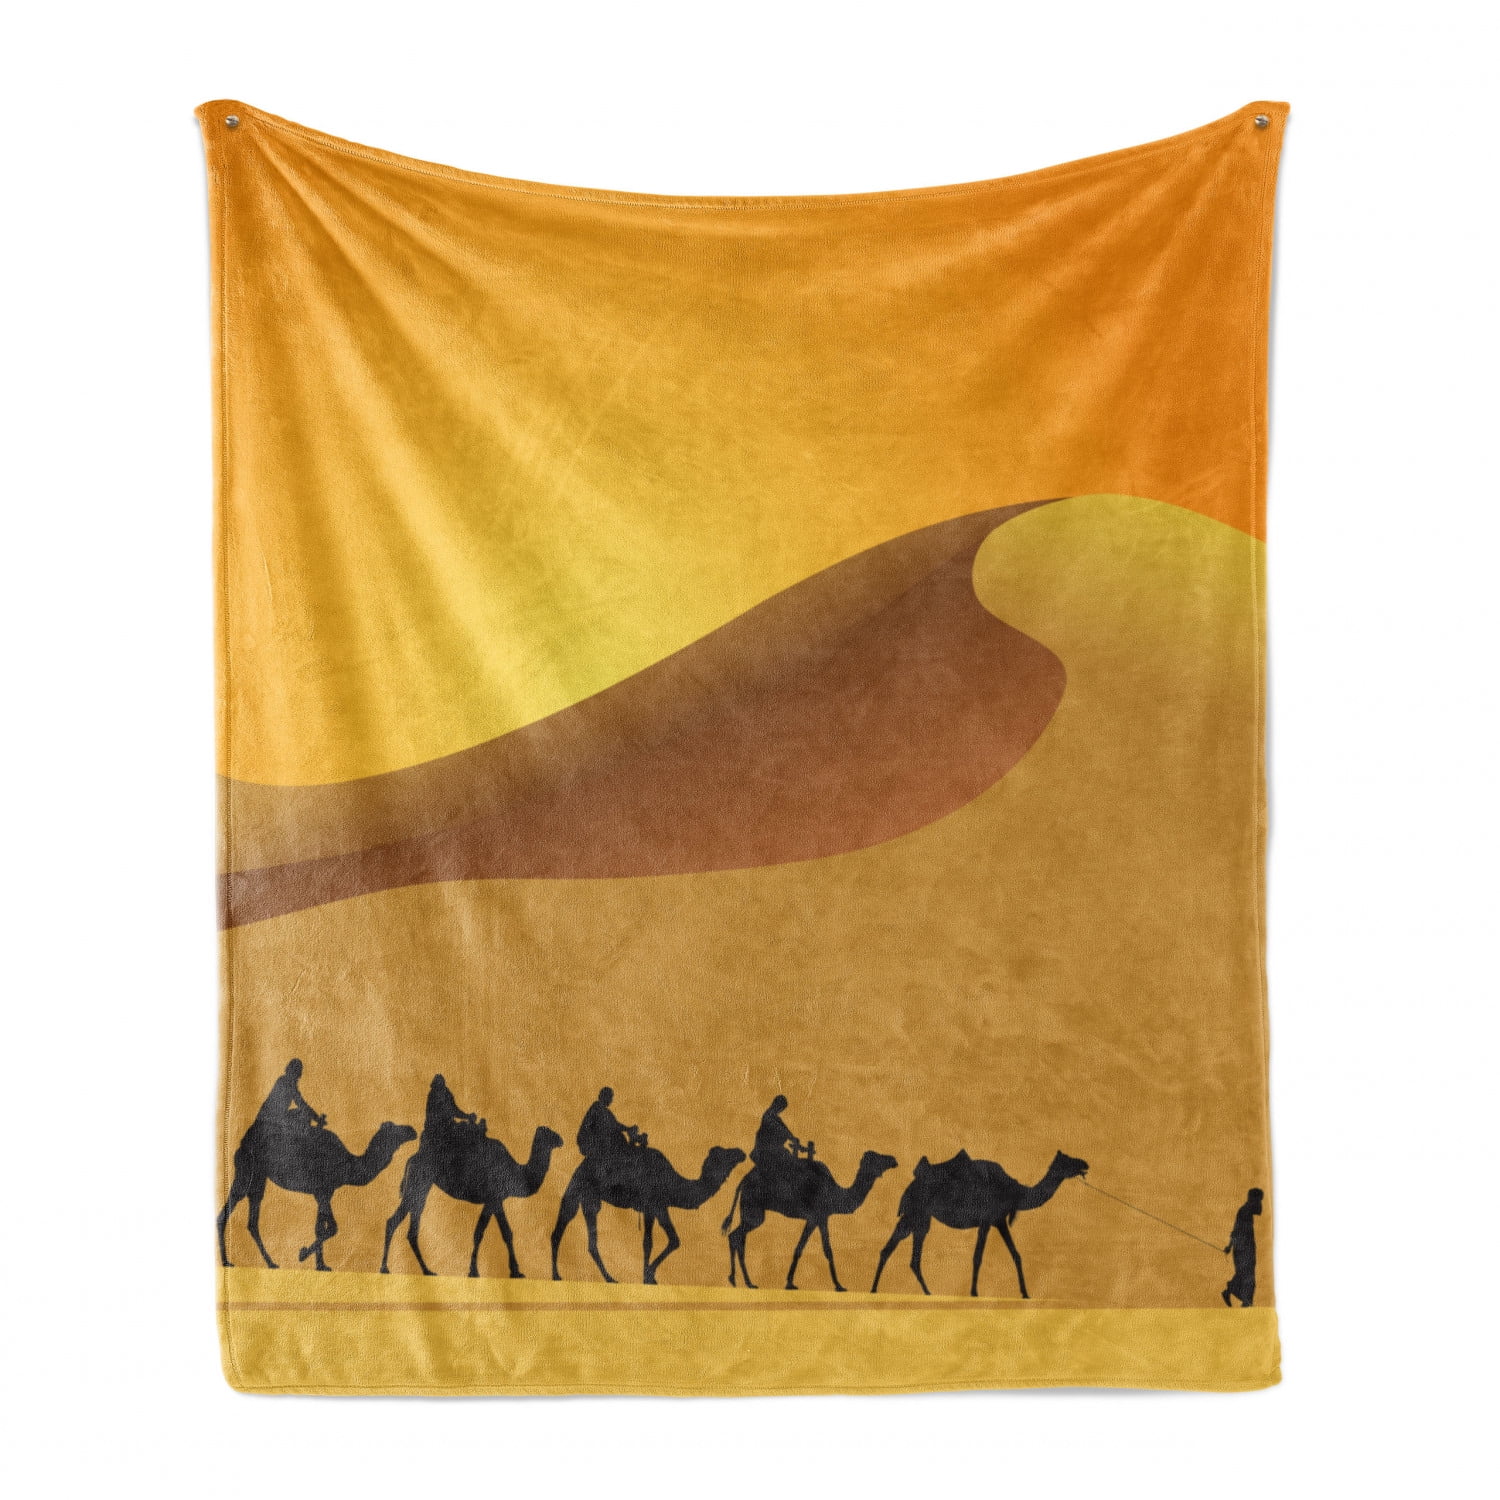 50 x 60 Cozy Plush for Indoor and Outdoor Use Marigold Dark Grey Hot Sahara Desert Illustration with a Camel Caravan Silhouette Ambesonne Dune Soft Flannel Fleece Throw Blanket